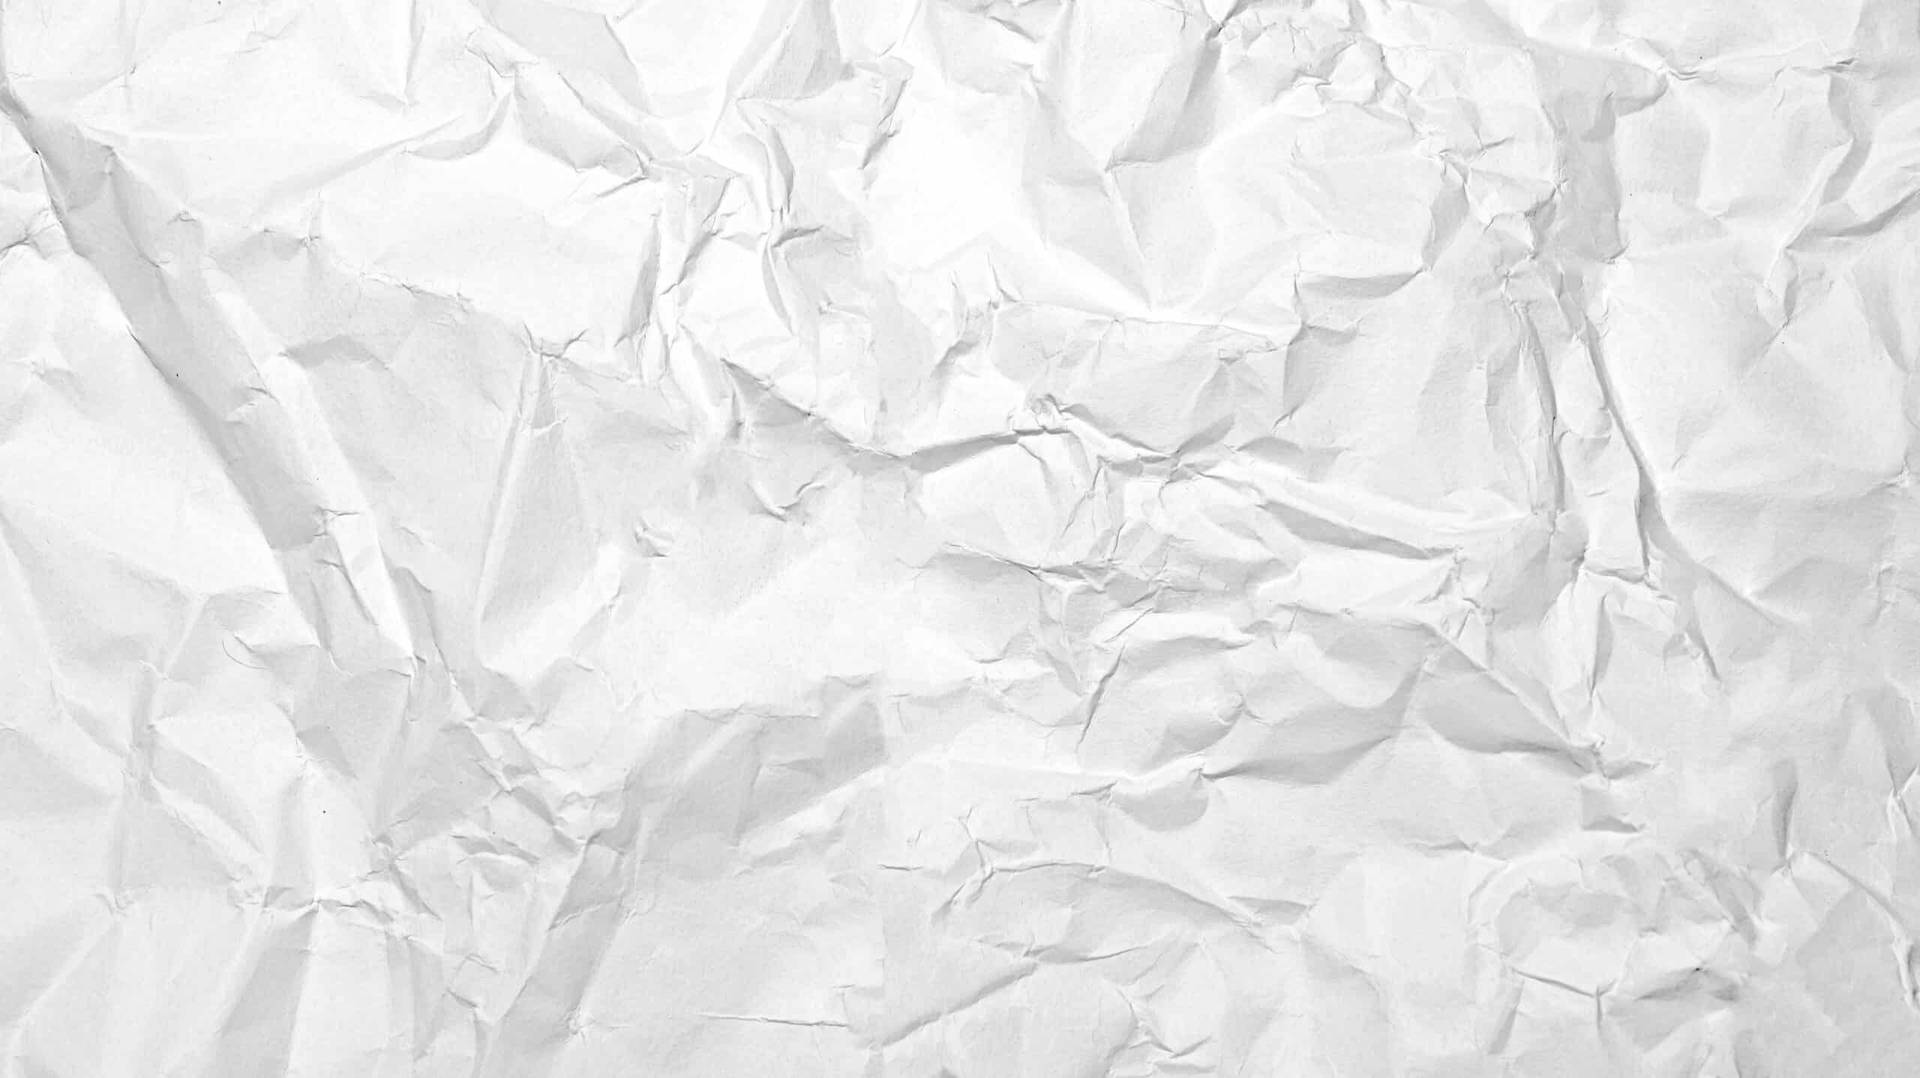 Abstract Crumpled White Paper Wallpaper